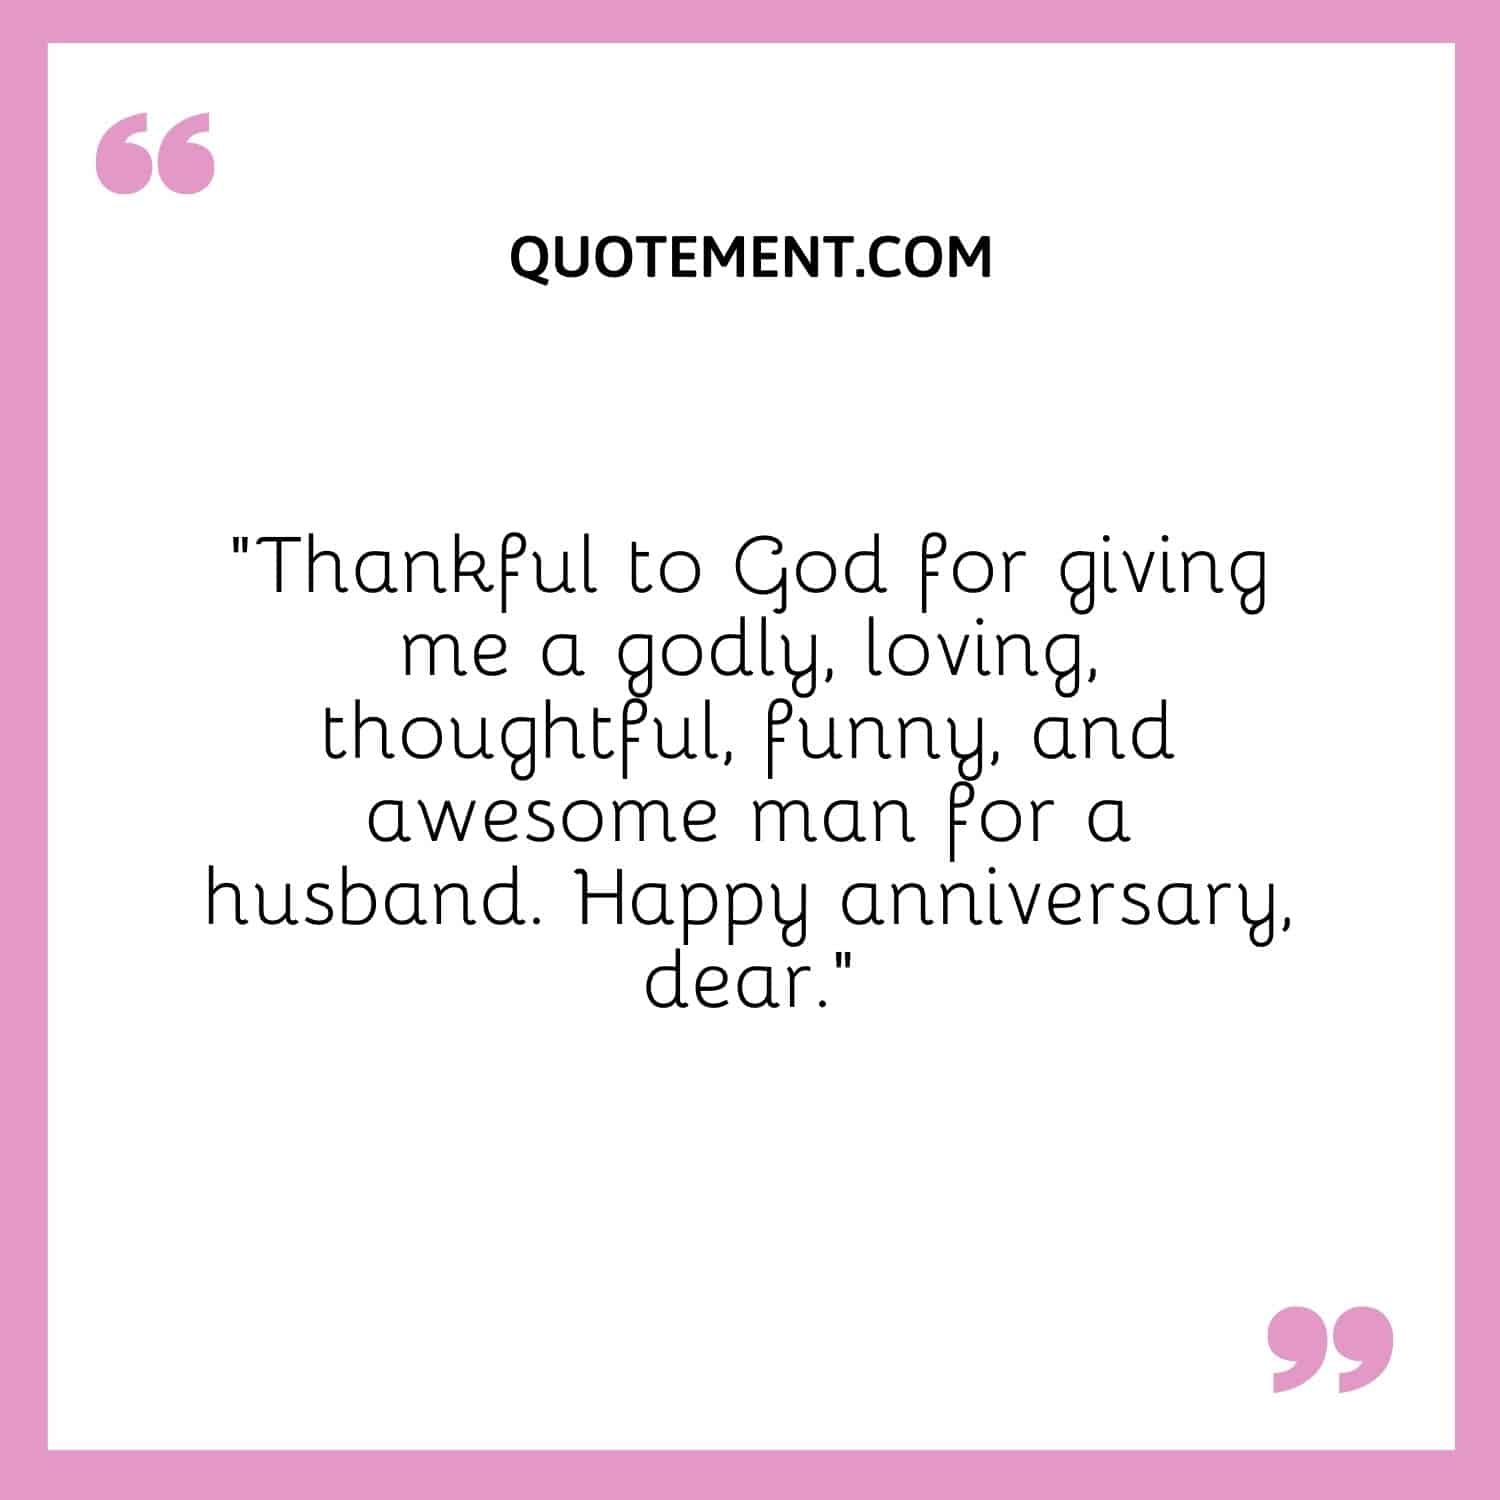 “Thankful to God for giving me a godly, loving, thoughtful, funny, and awesome man for a husband. Happy anniversary, dear.”